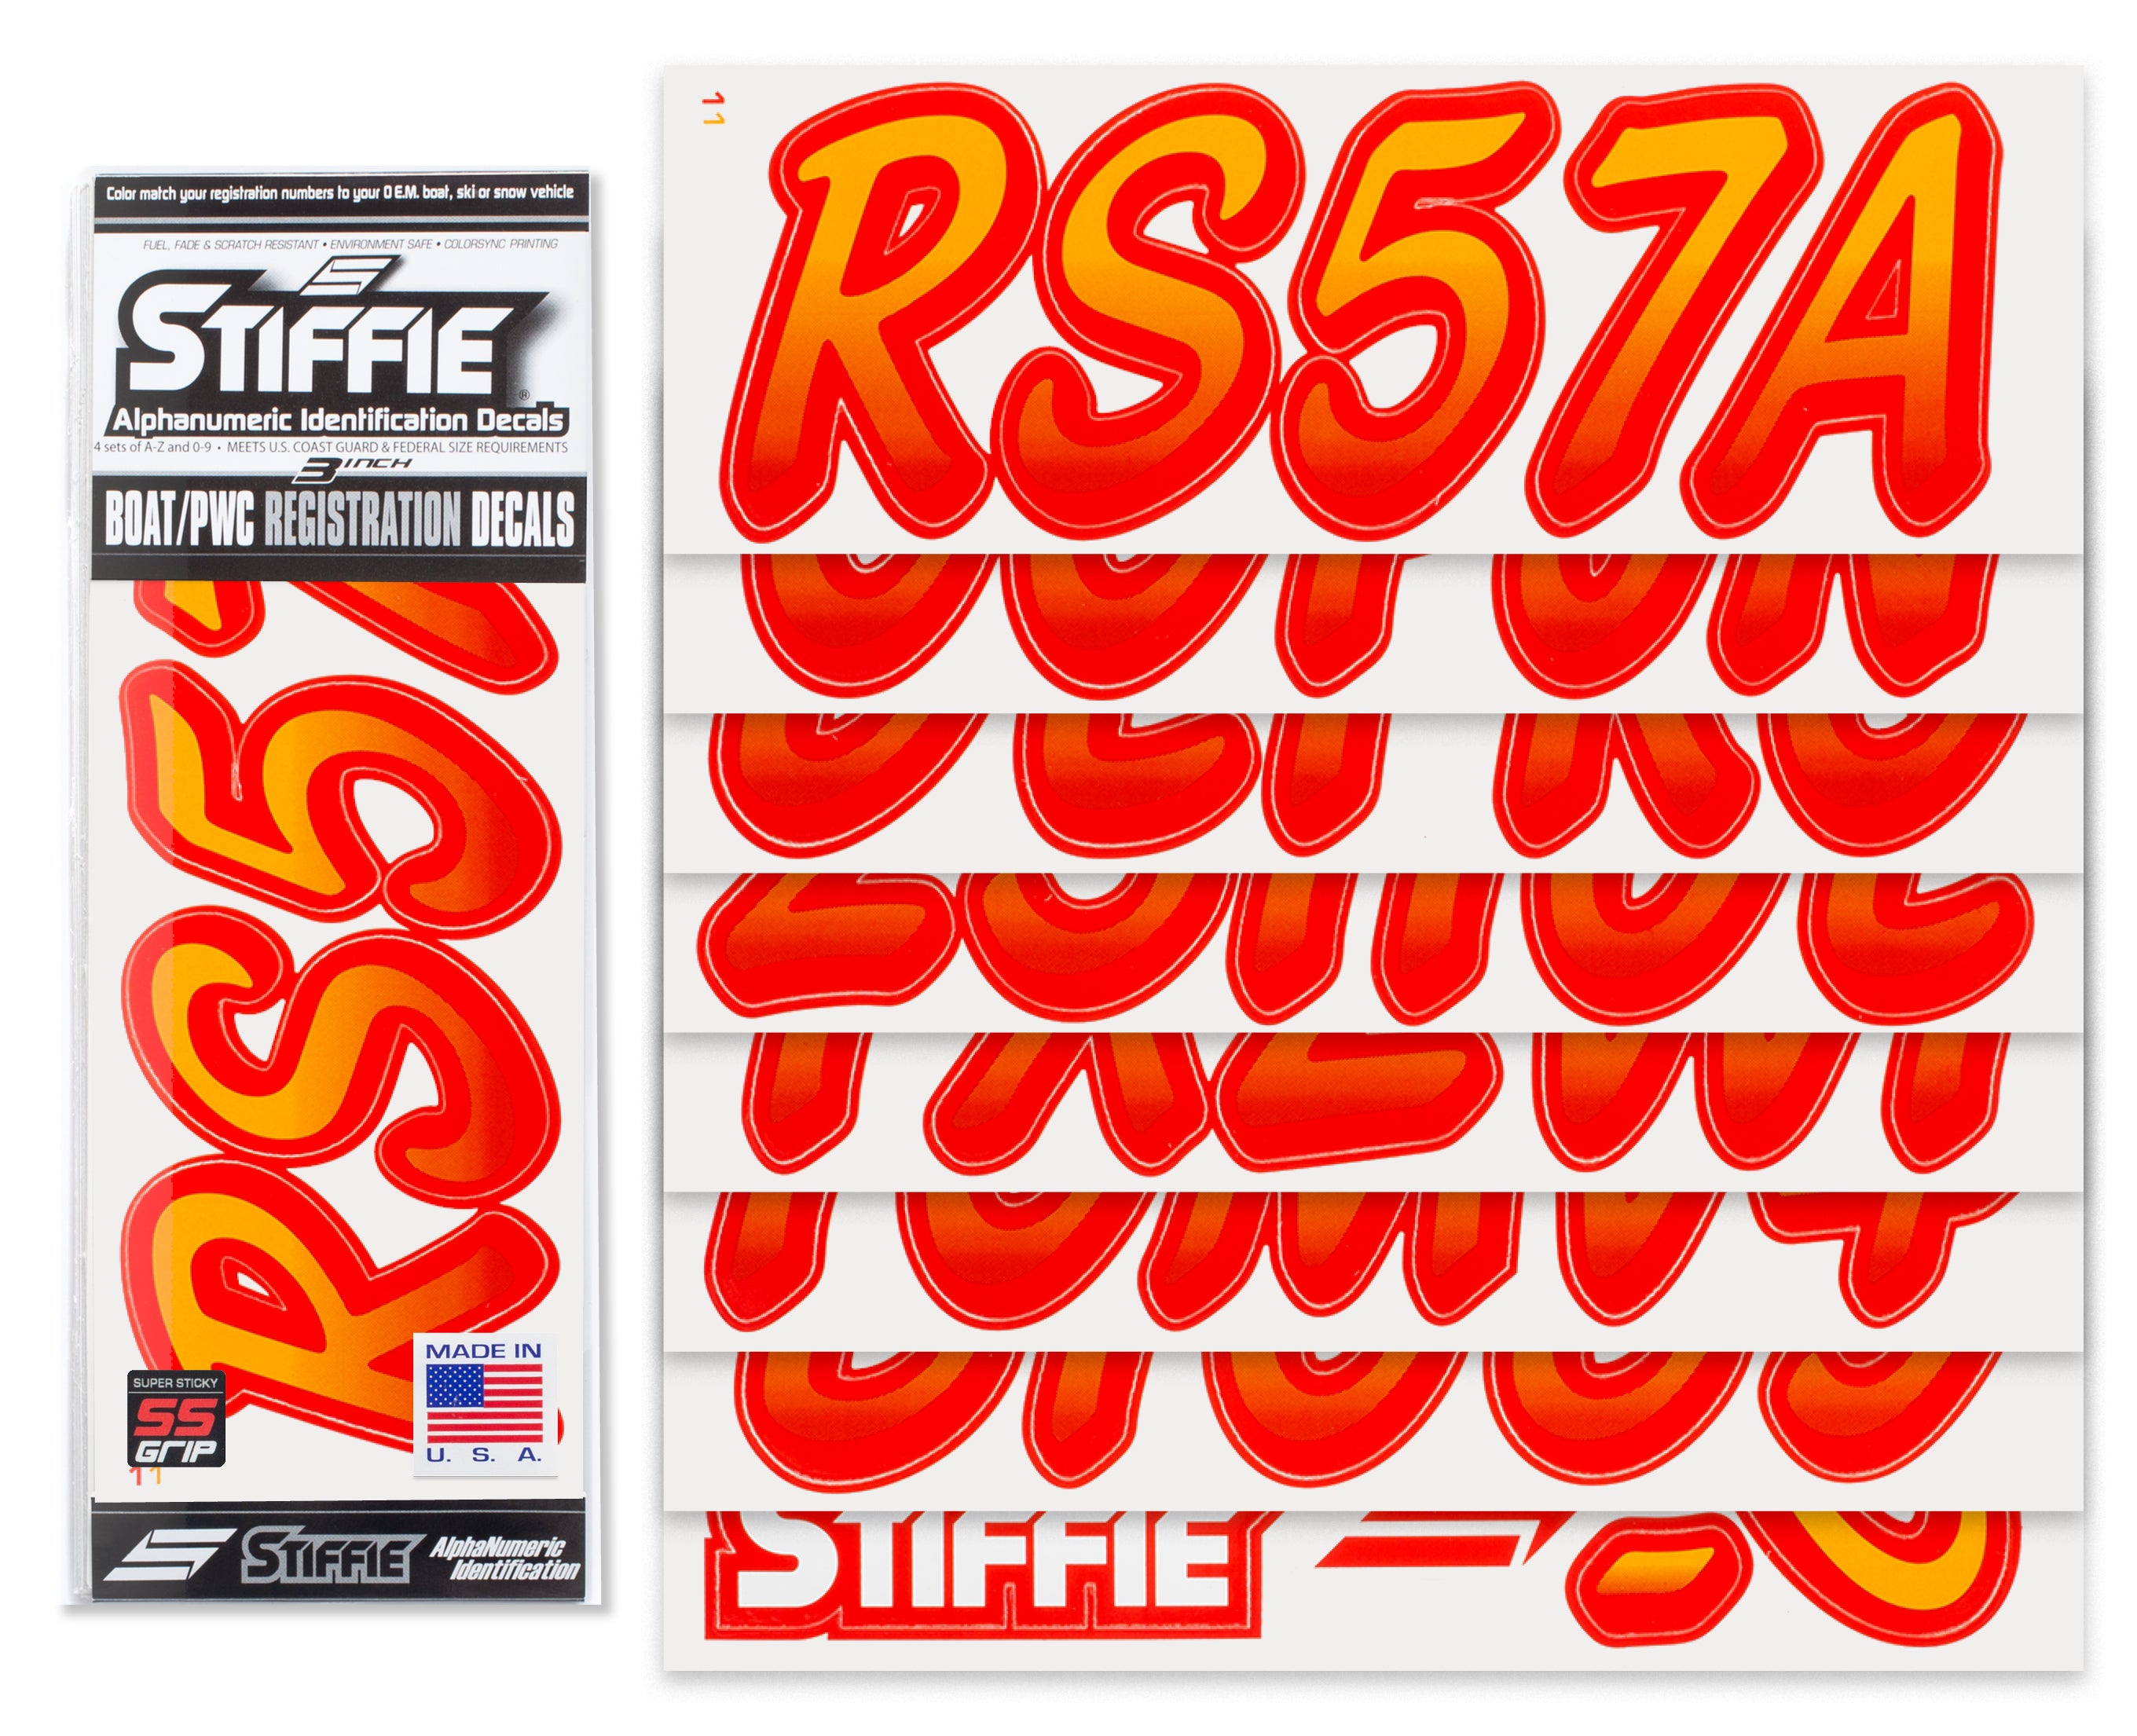 Stiffie Whipline Orange Crush/Lava Red Super Sticky 3" Alpha Numeric Registration Identification Numbers Stickers Decals for Sea-Doo Spark, Inflatable Boats, Ribs, Hypalon/PVC, PWC and Boats.